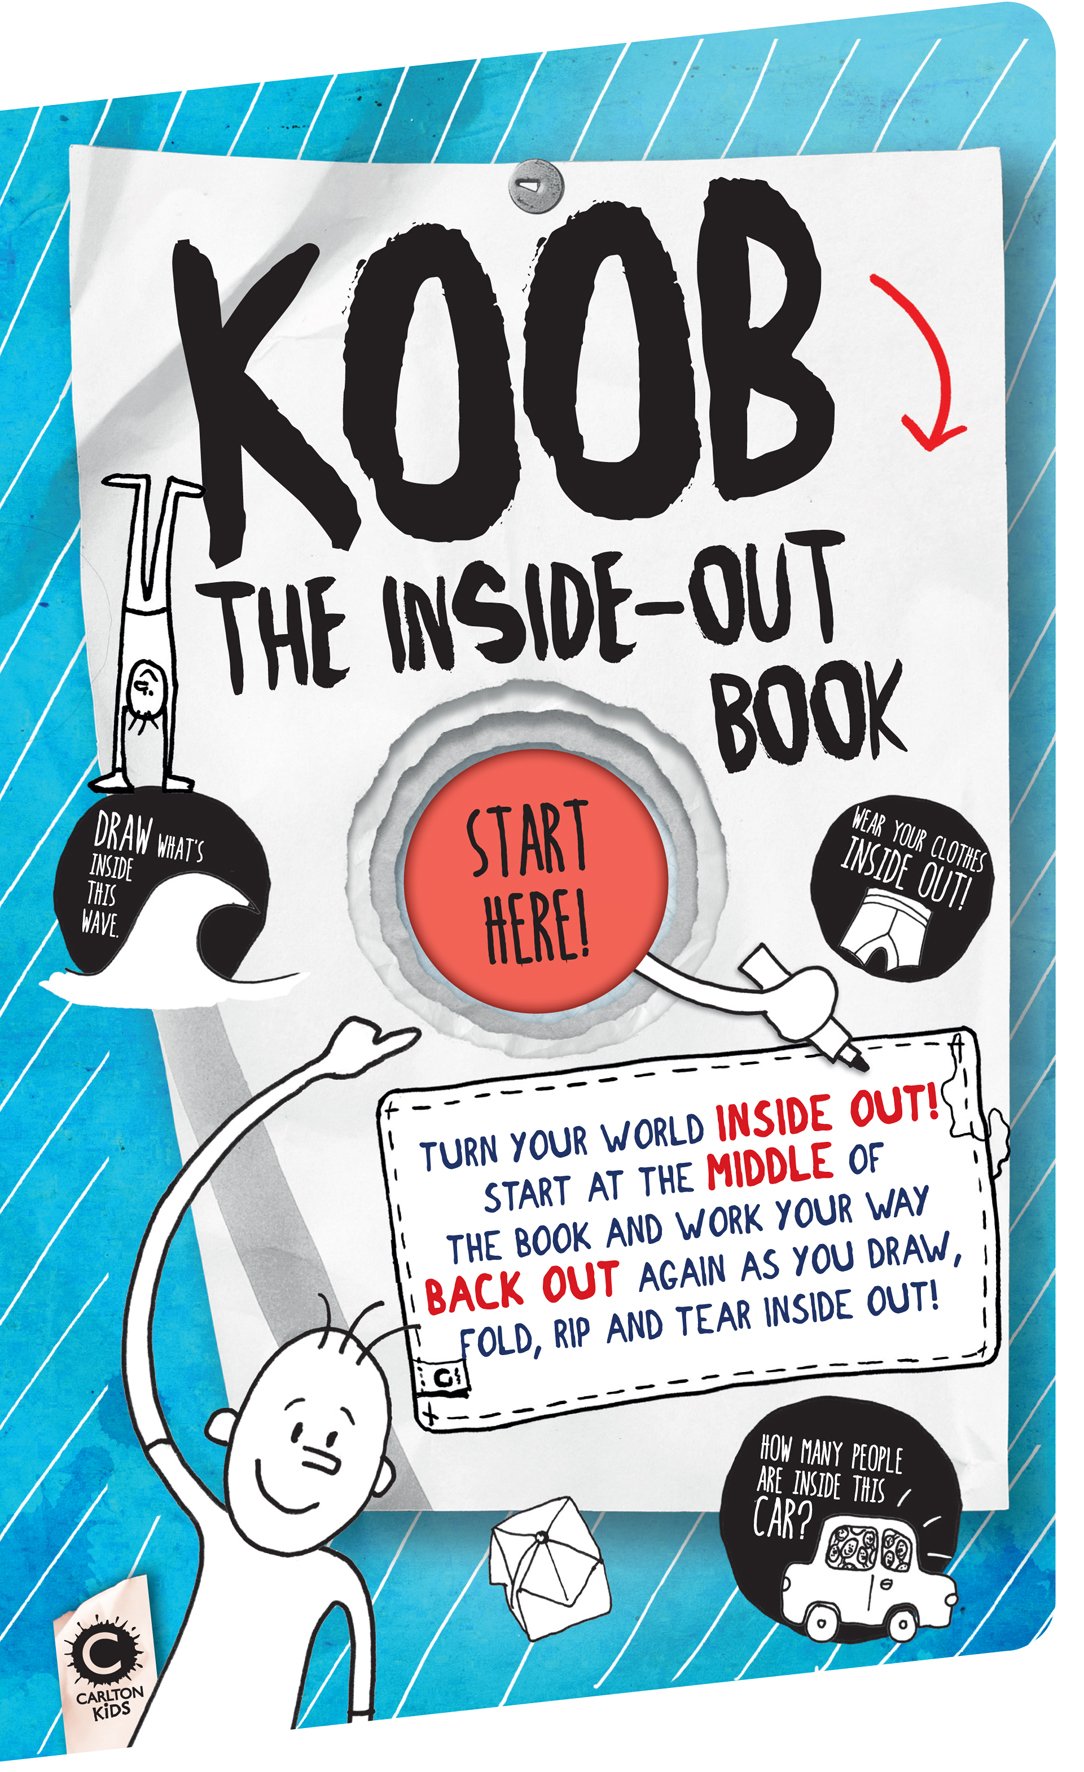 KOOB: The Inside-Out Book